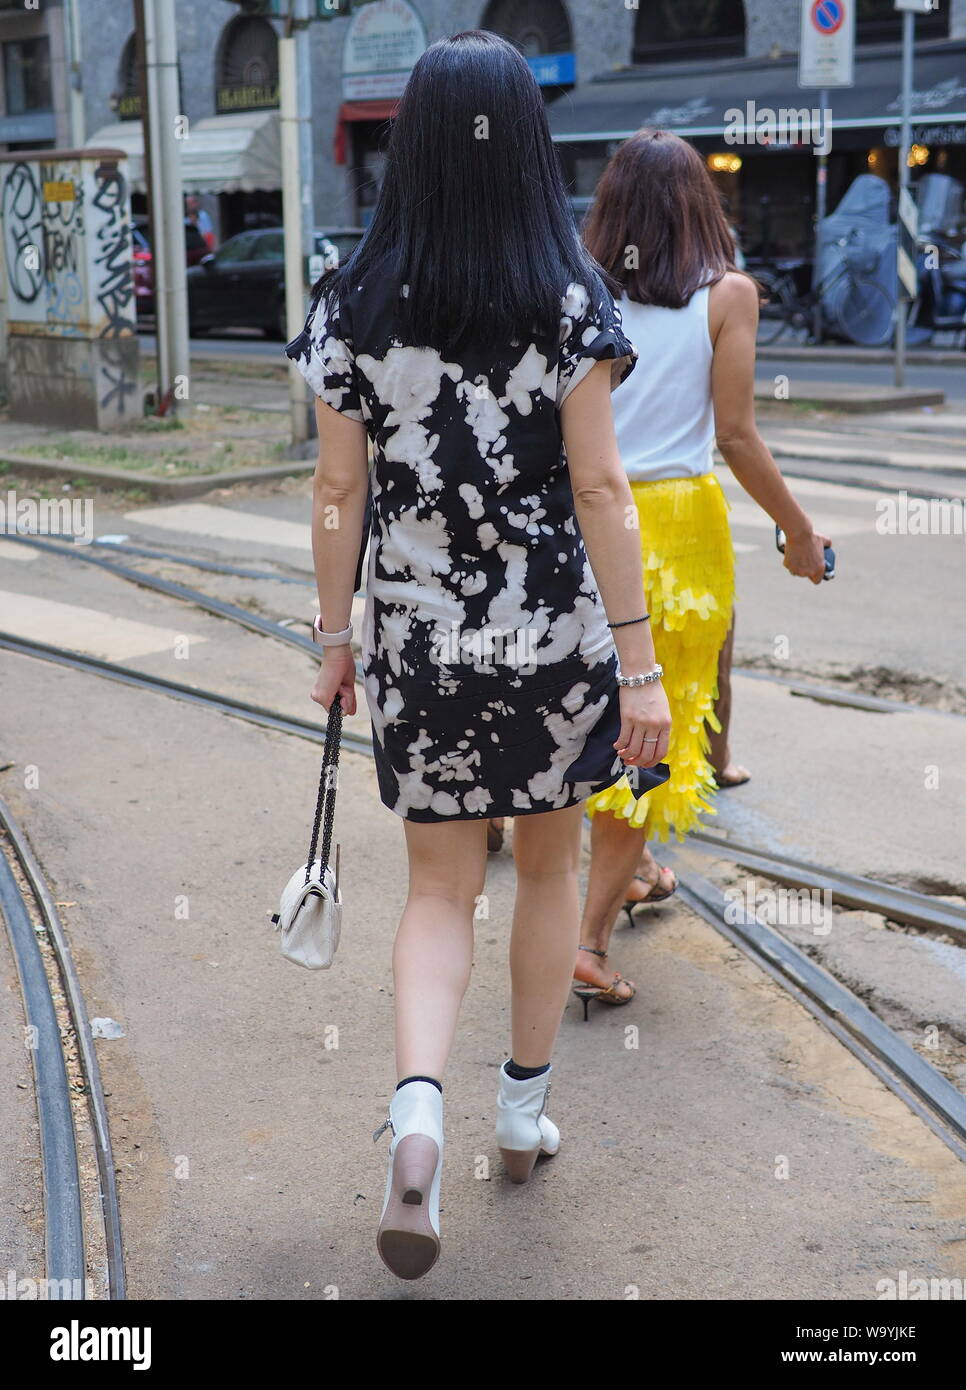 MILANO, Italy: 15 June 2019: Fashion blogger street style outfit